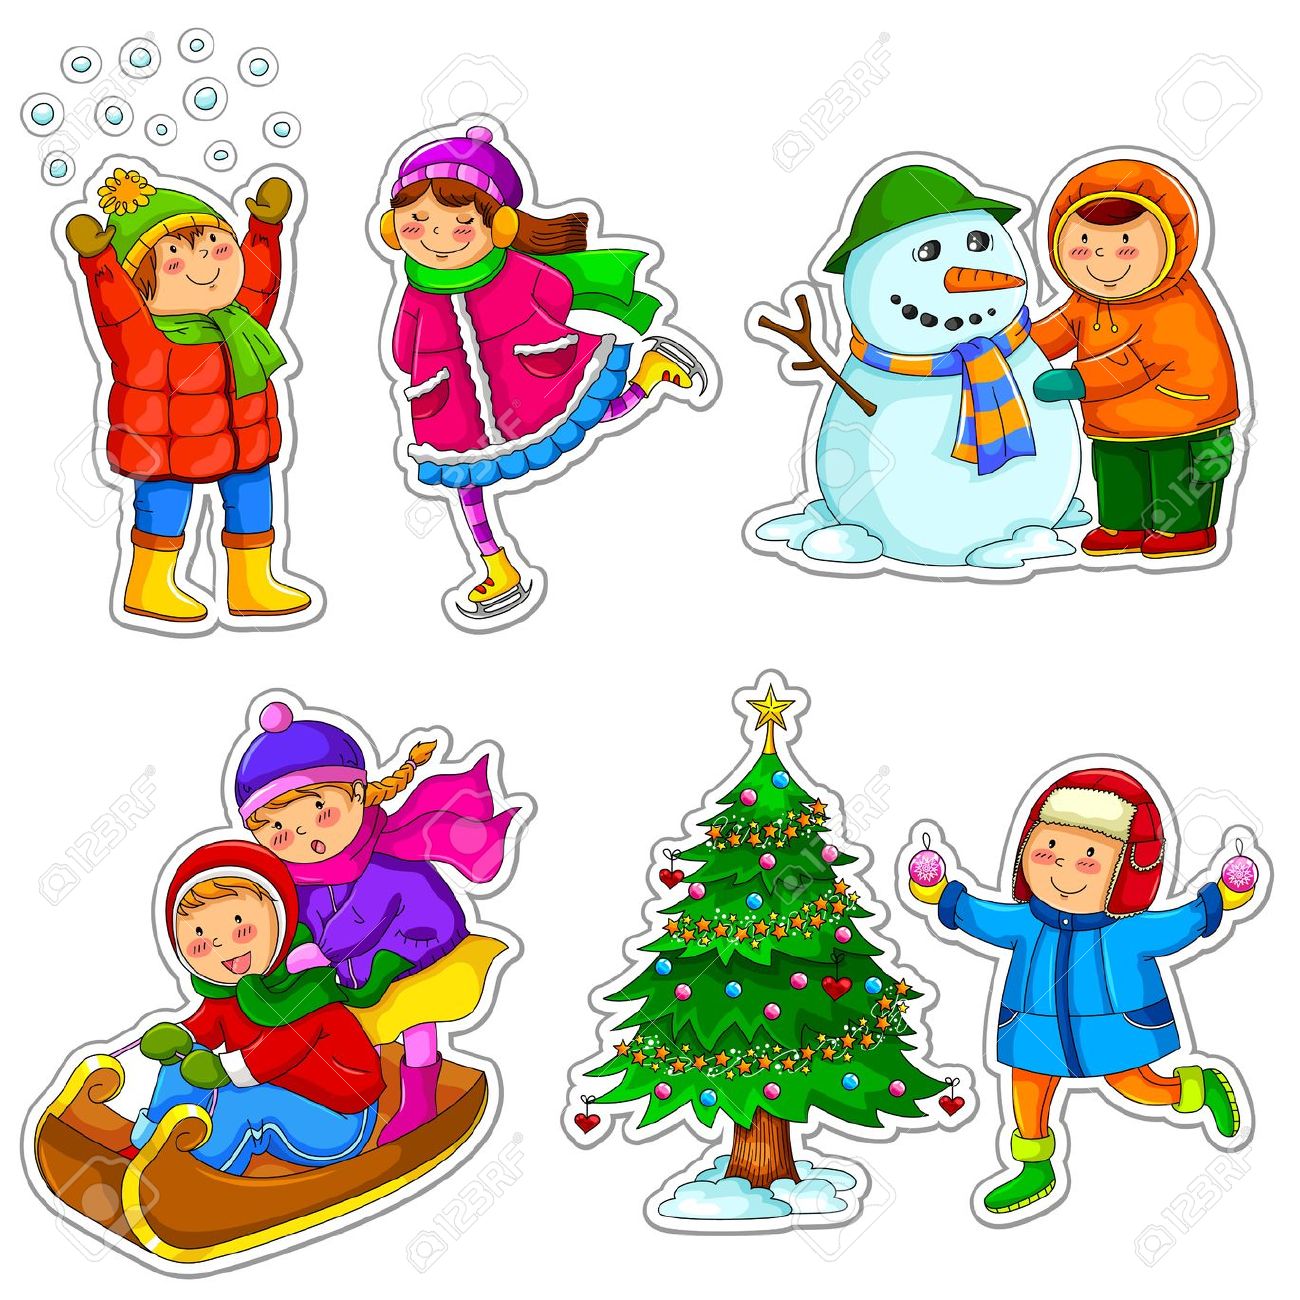 Seasons clipart for.